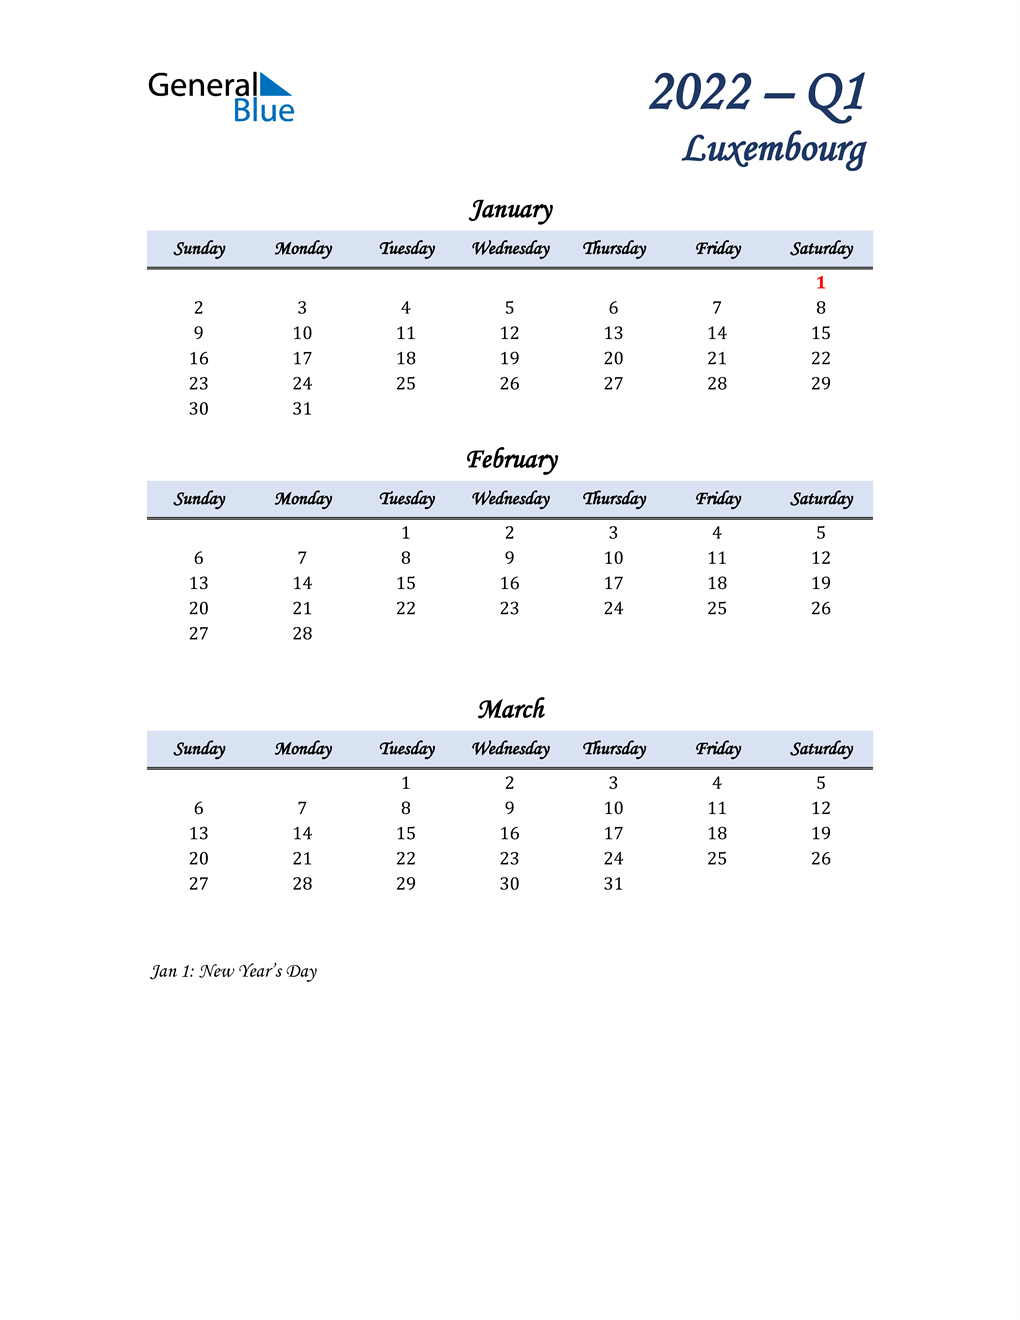  January, February, and March Calendar for Luxembourg